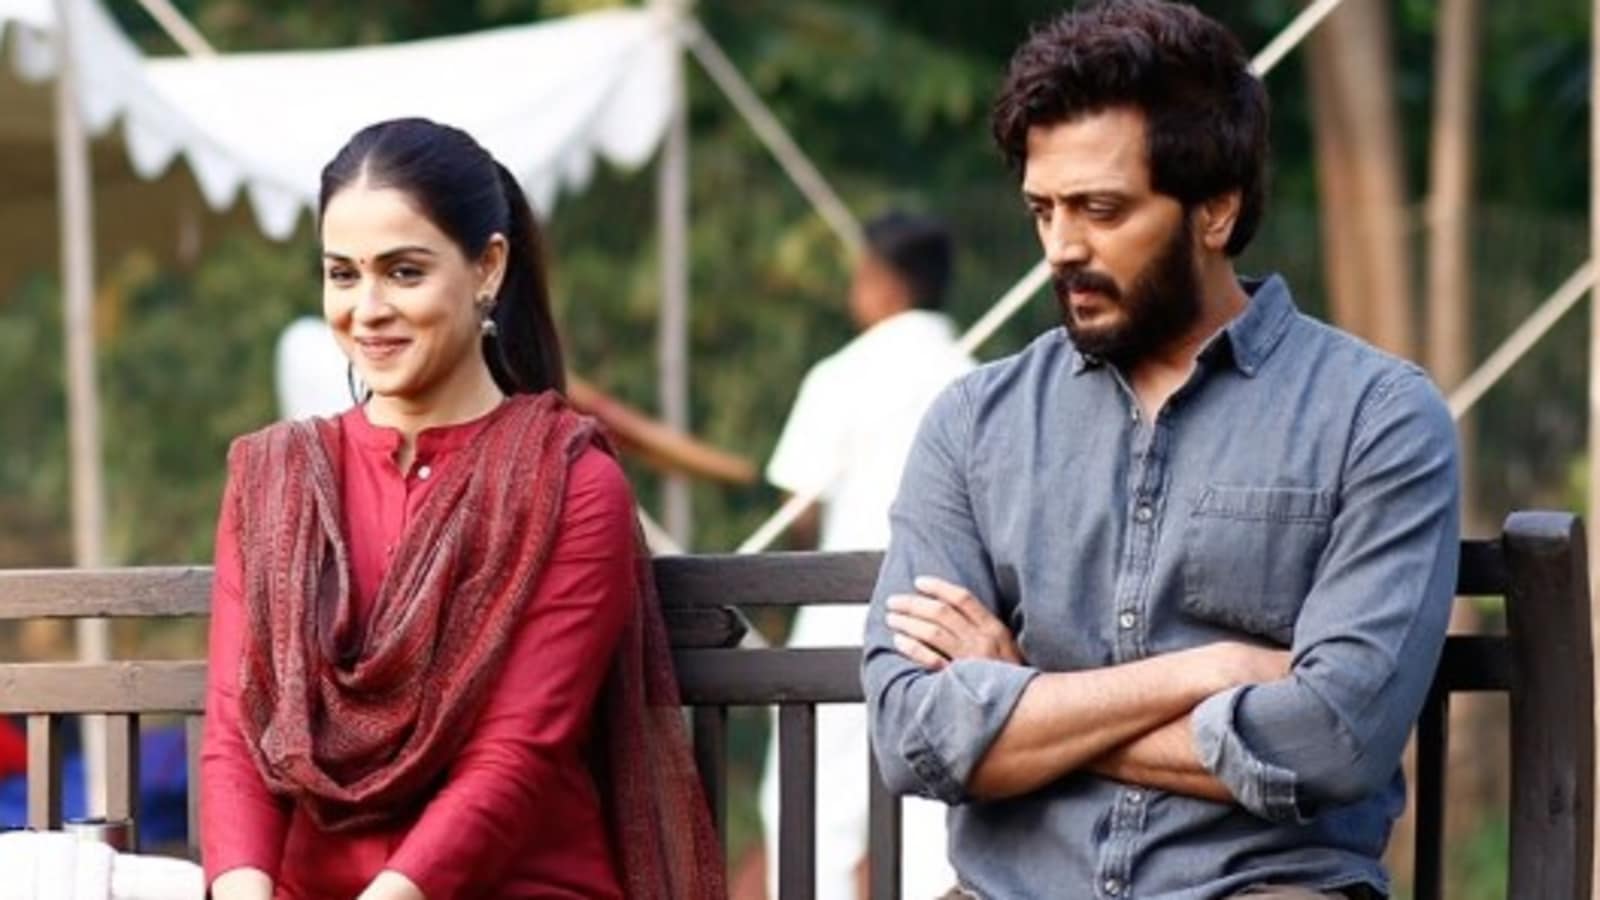 Ved box office: Riteish Deshmukh-starrer becomes second-highest grossing Marathi film after Sairat, earns ₹44.9 crore